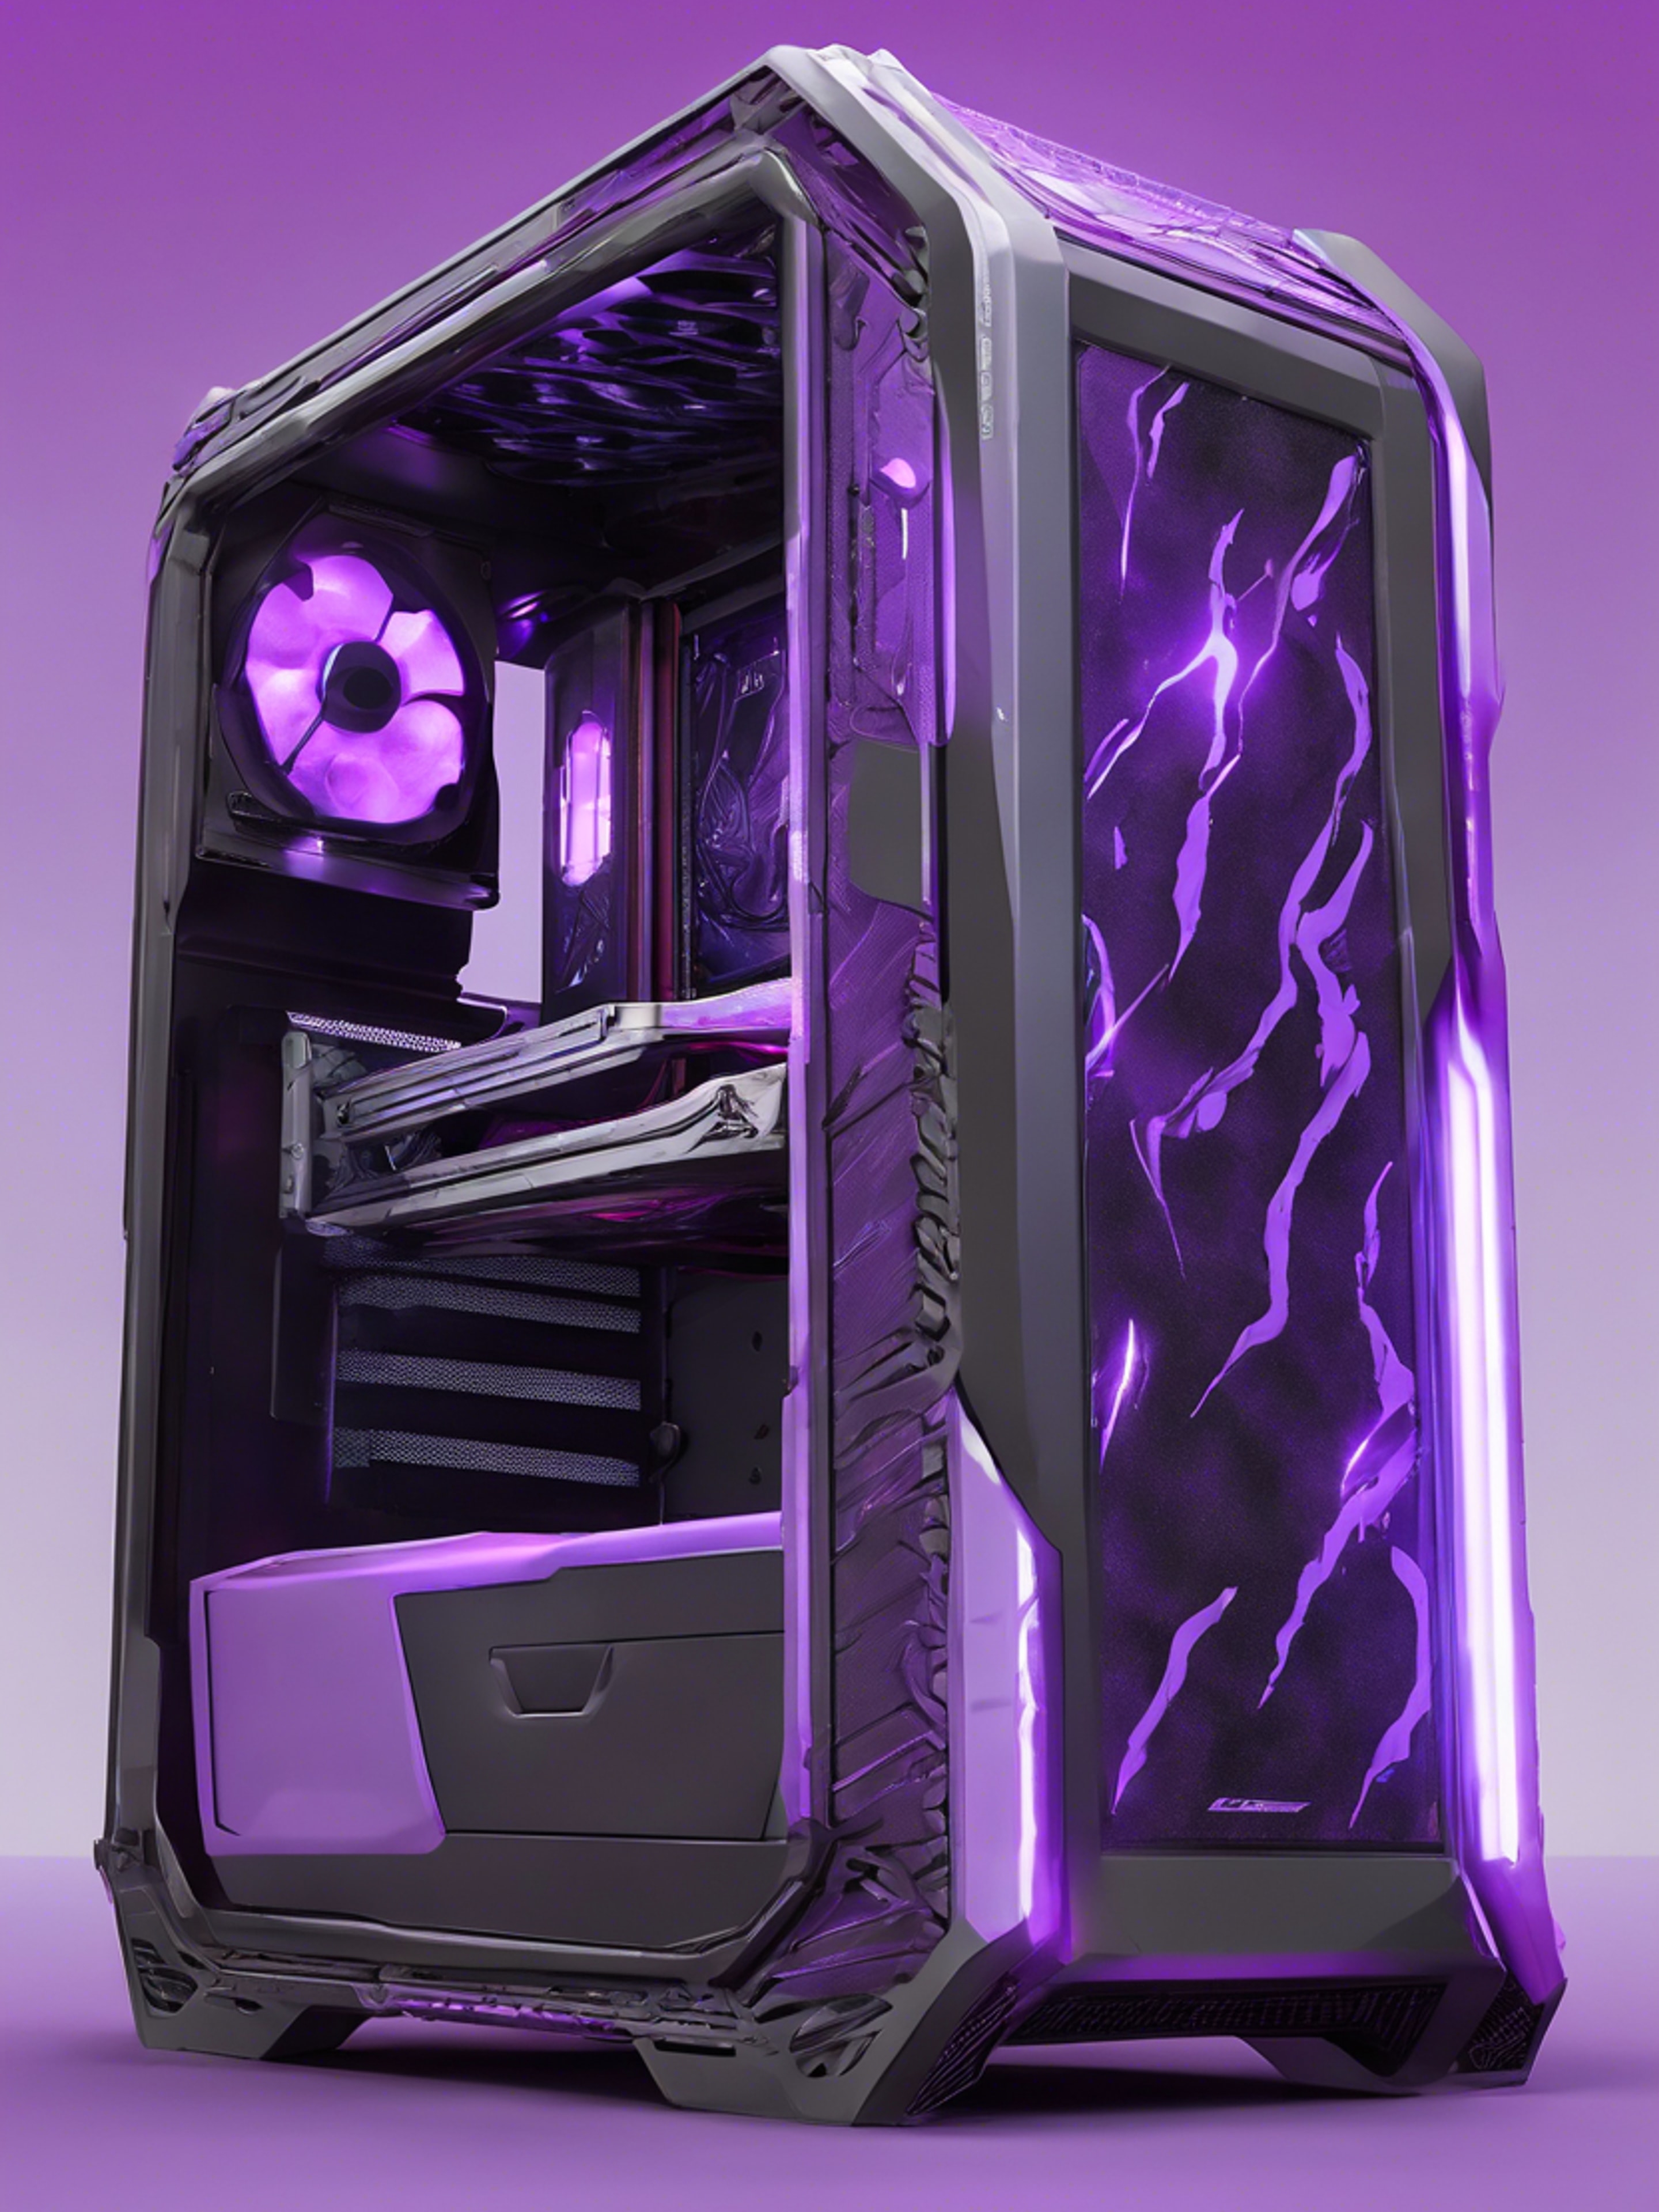 A side view of a thunderous gaming rig covered in custom neon purple detailing under cool lighting. Papel de parede[cca71b66ee6840febbf4]